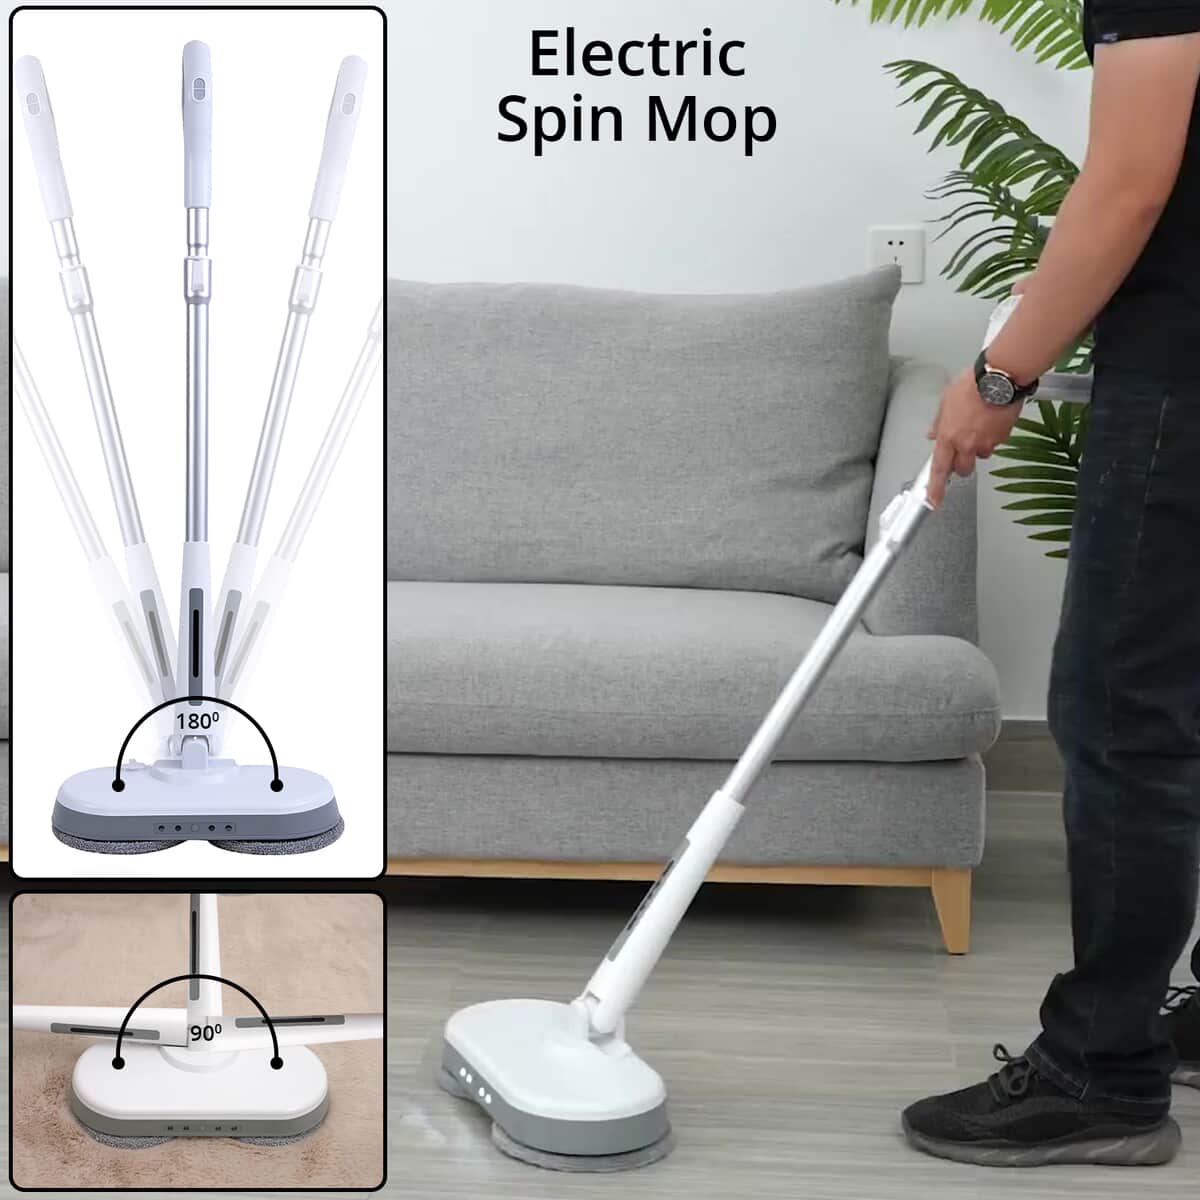 Homesmart White and Gray Cordless Electric Spin Mop with 280ml Water Tank and Built-in 4 LED Light image number 1